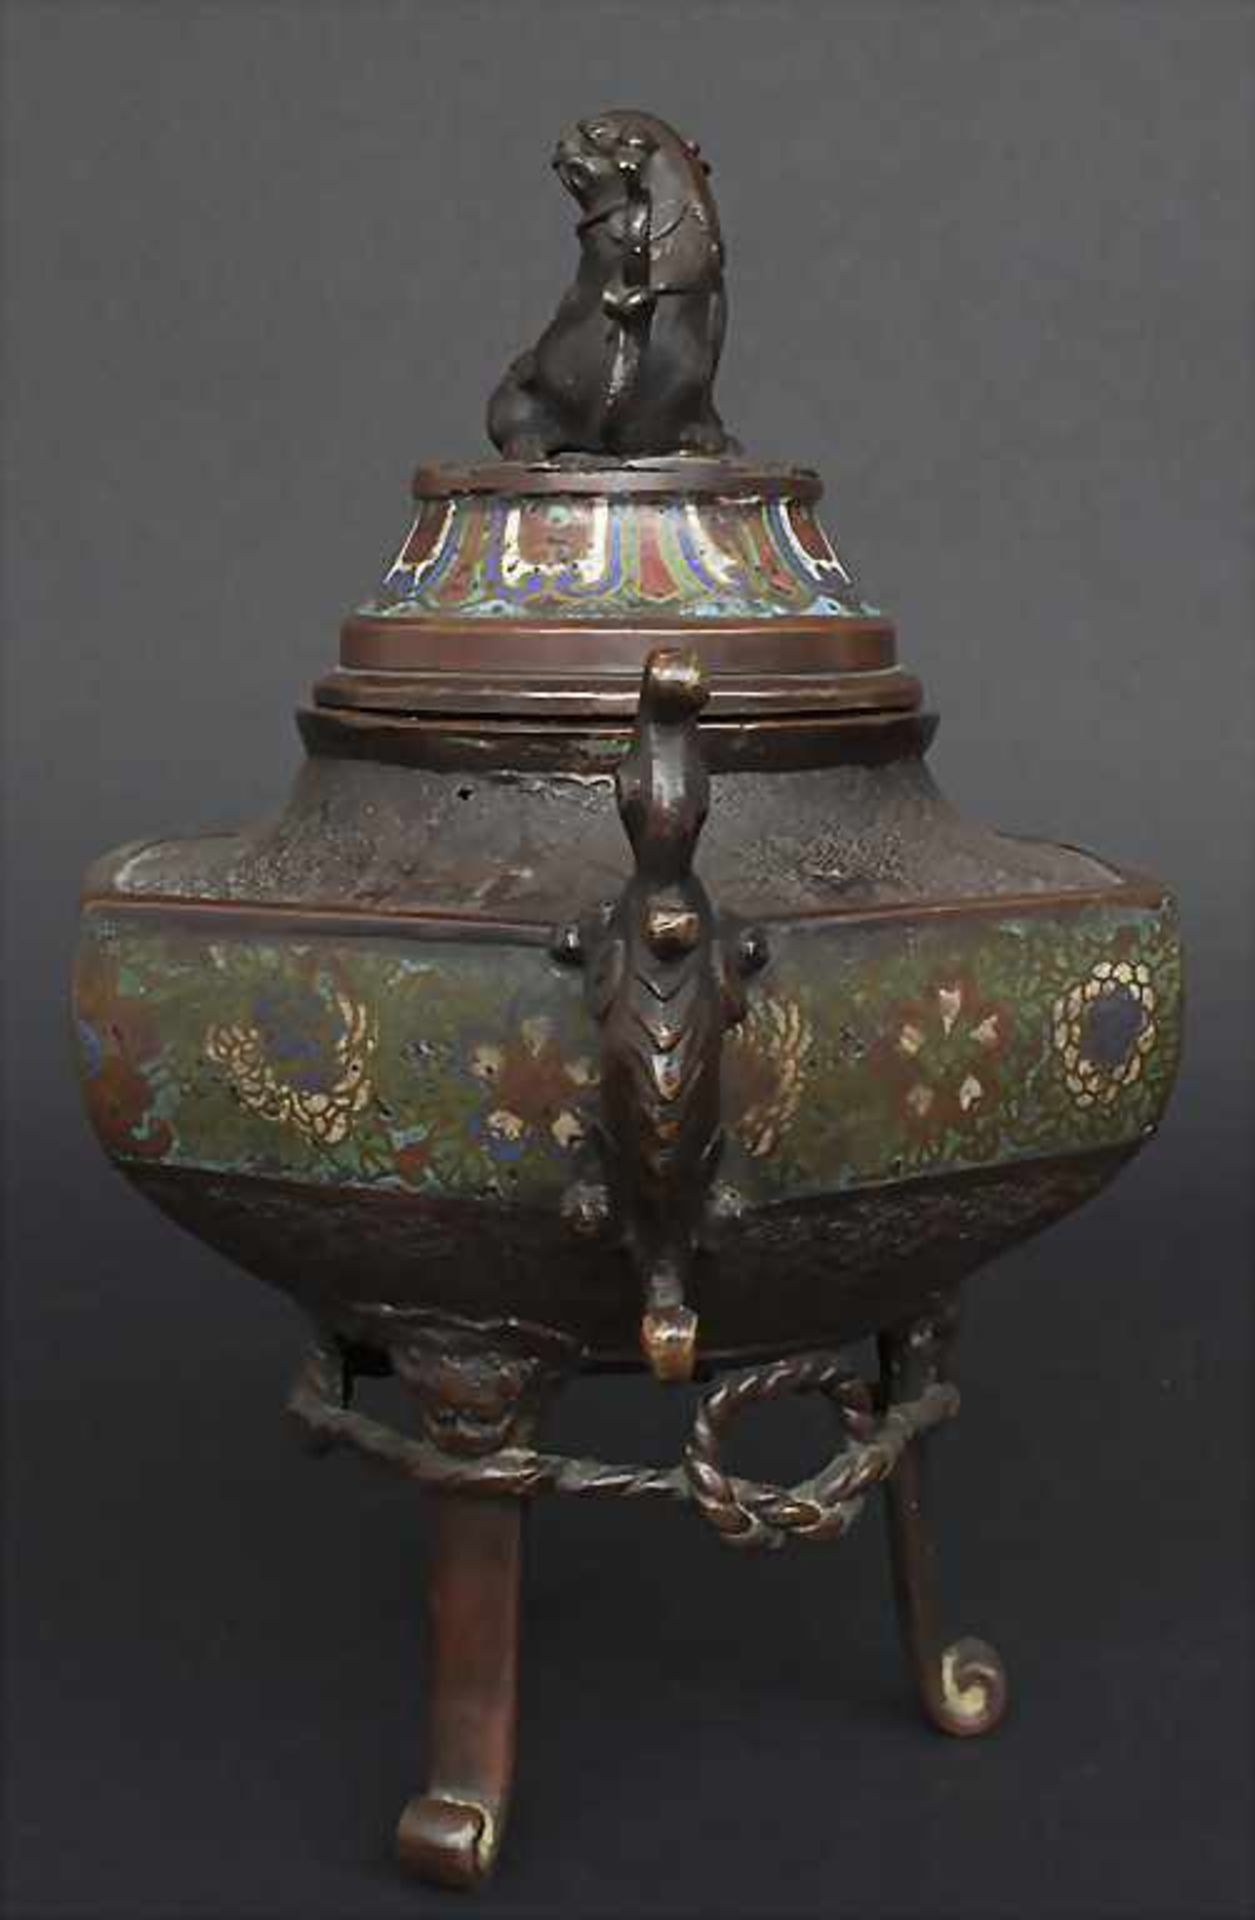 Cloisonné Weihrauchbrenner mit Shishi / A Cloisonné incense burner with Shishi, China, 19. Jh. - Image 4 of 8